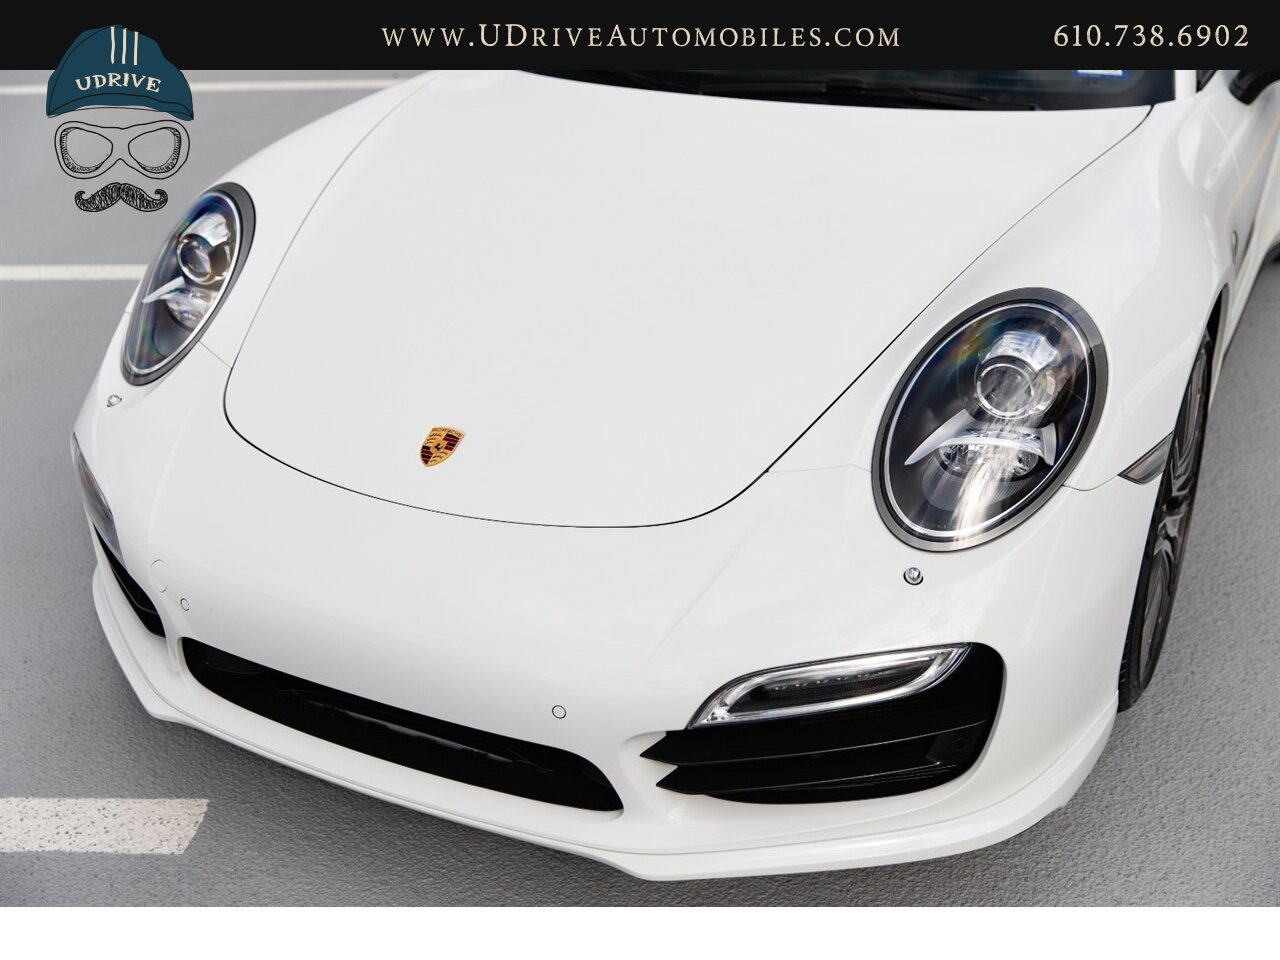 2014 Porsche 911 Turbo 12k Miles White over Black Chrono Rear Wiper  Sport Seats 20in Turbo Whls Sunroof Red Belts - Photo 9 - West Chester, PA 19382